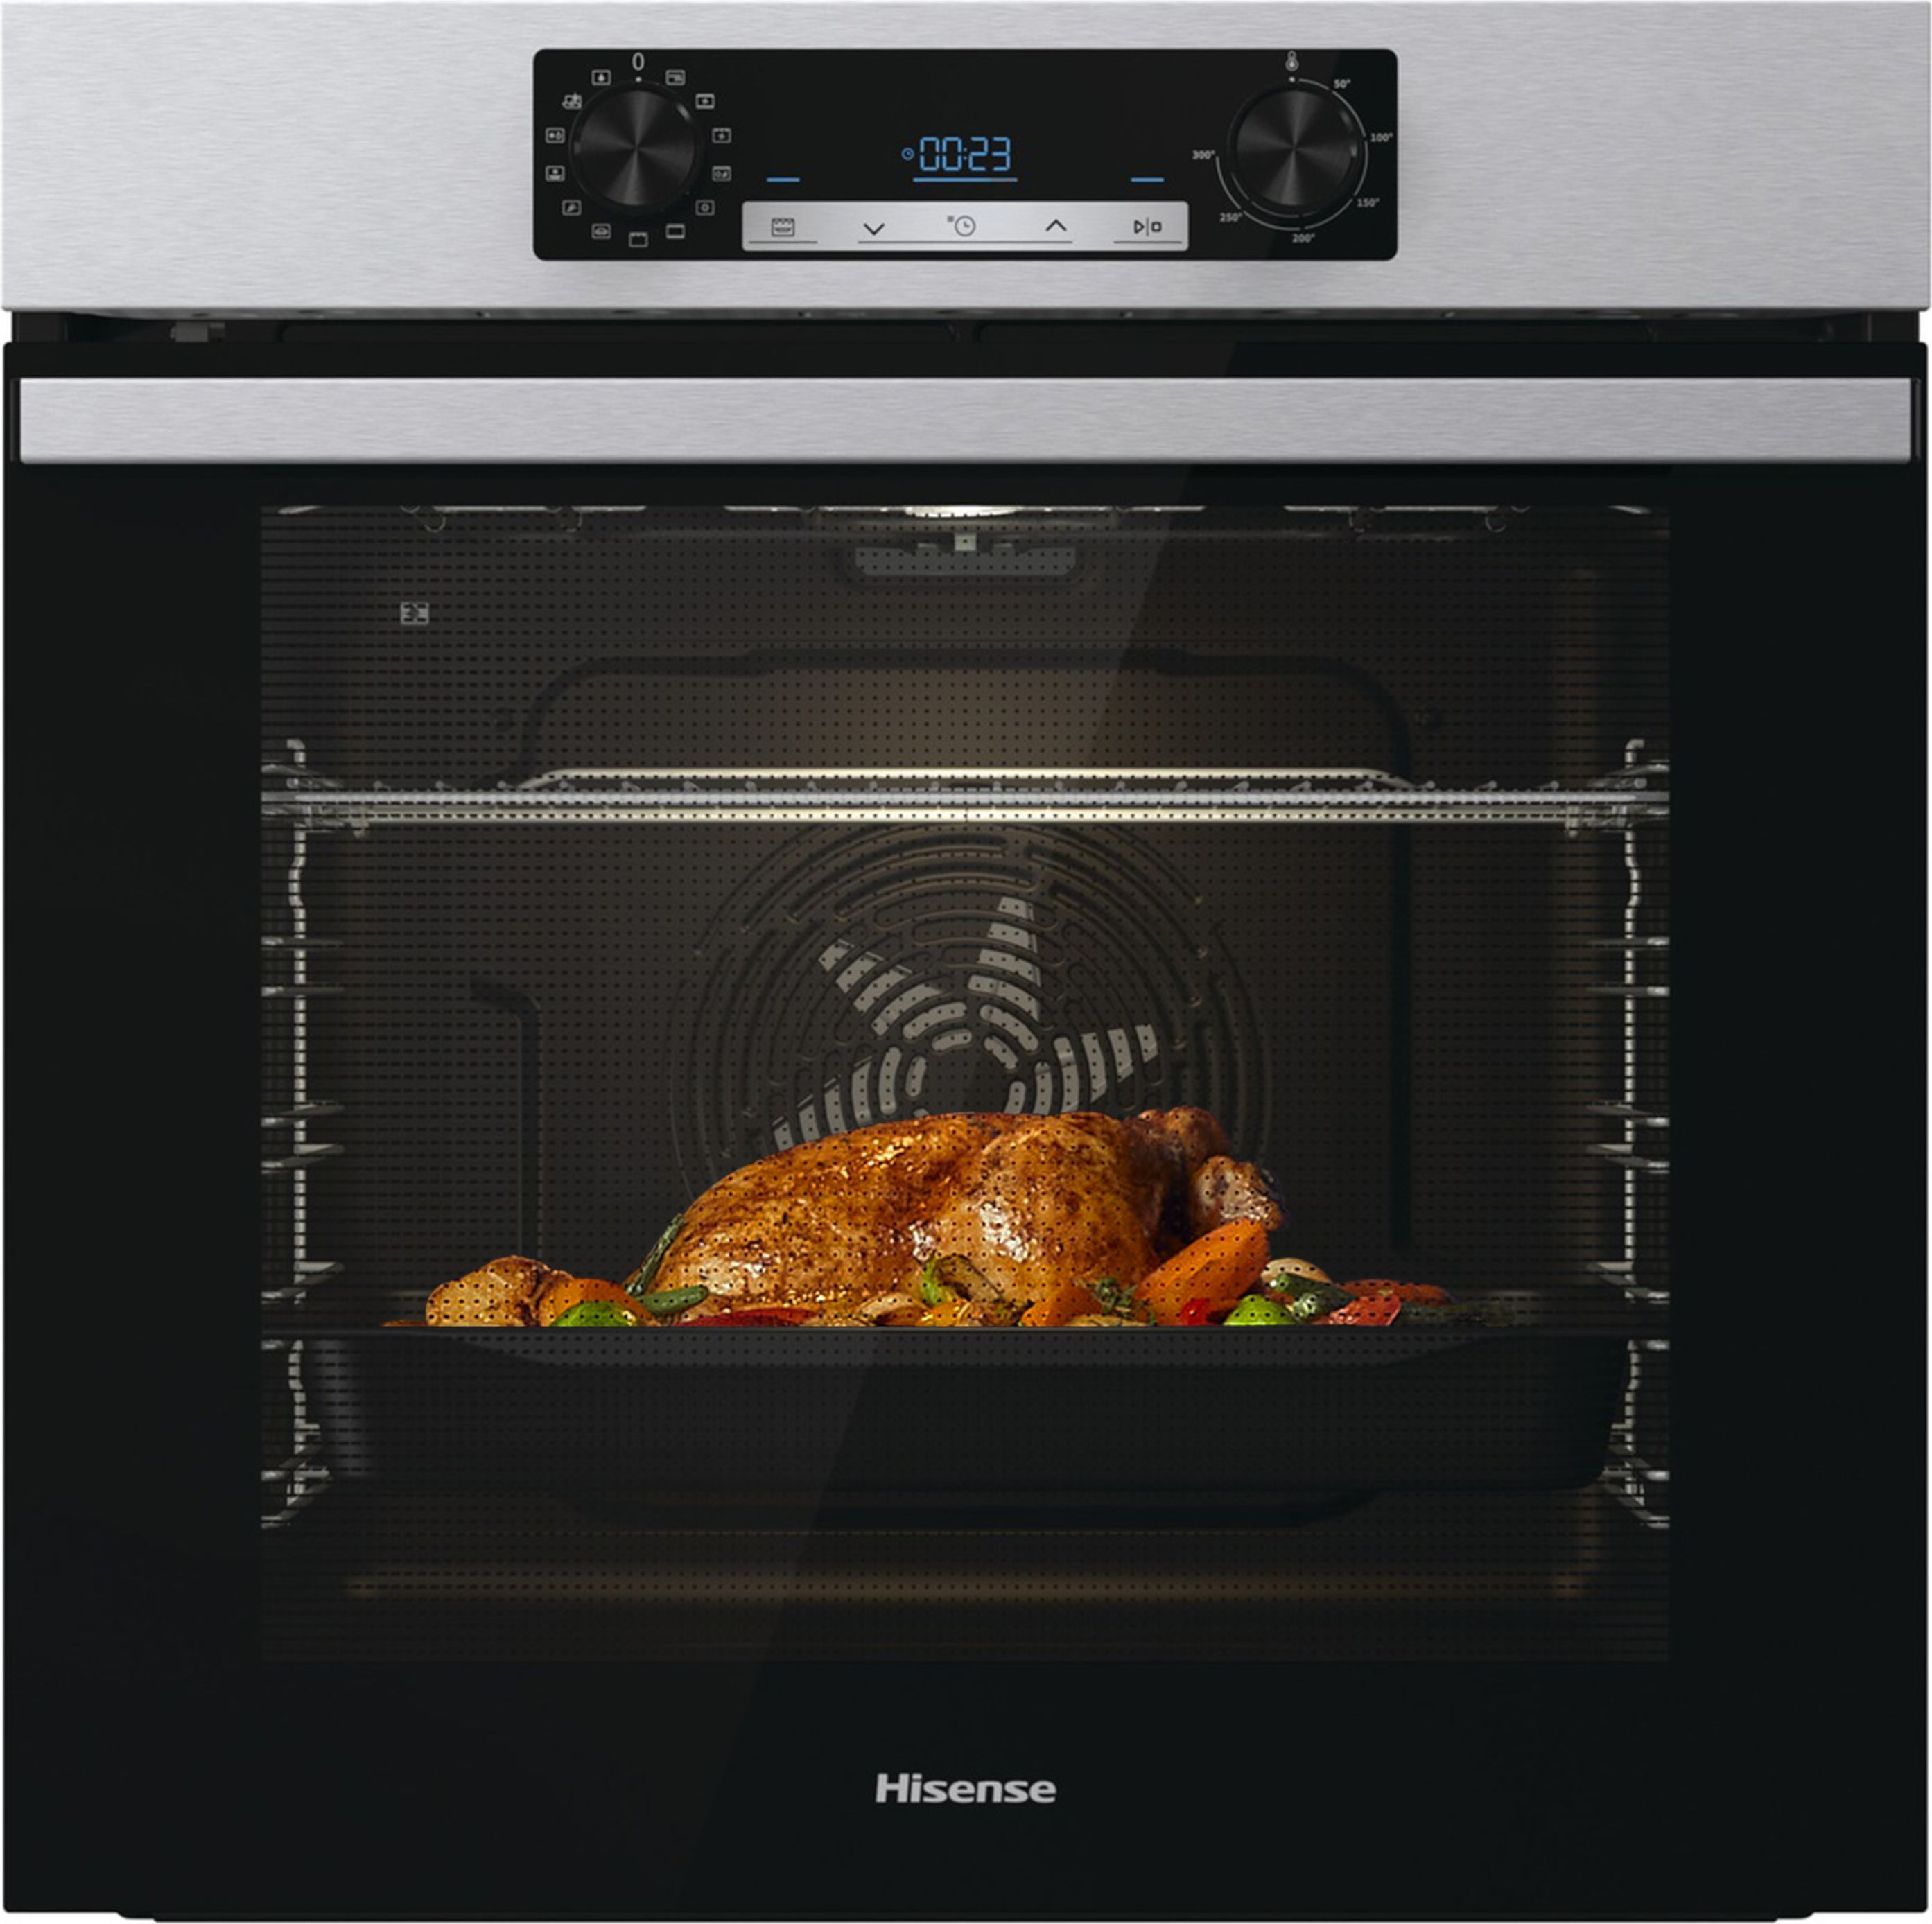 Hisense BI64211PX Built In Electric Single Oven and Pyrolytic Cleaning - Stainless Steel - A+ Rated, Stainless Steel